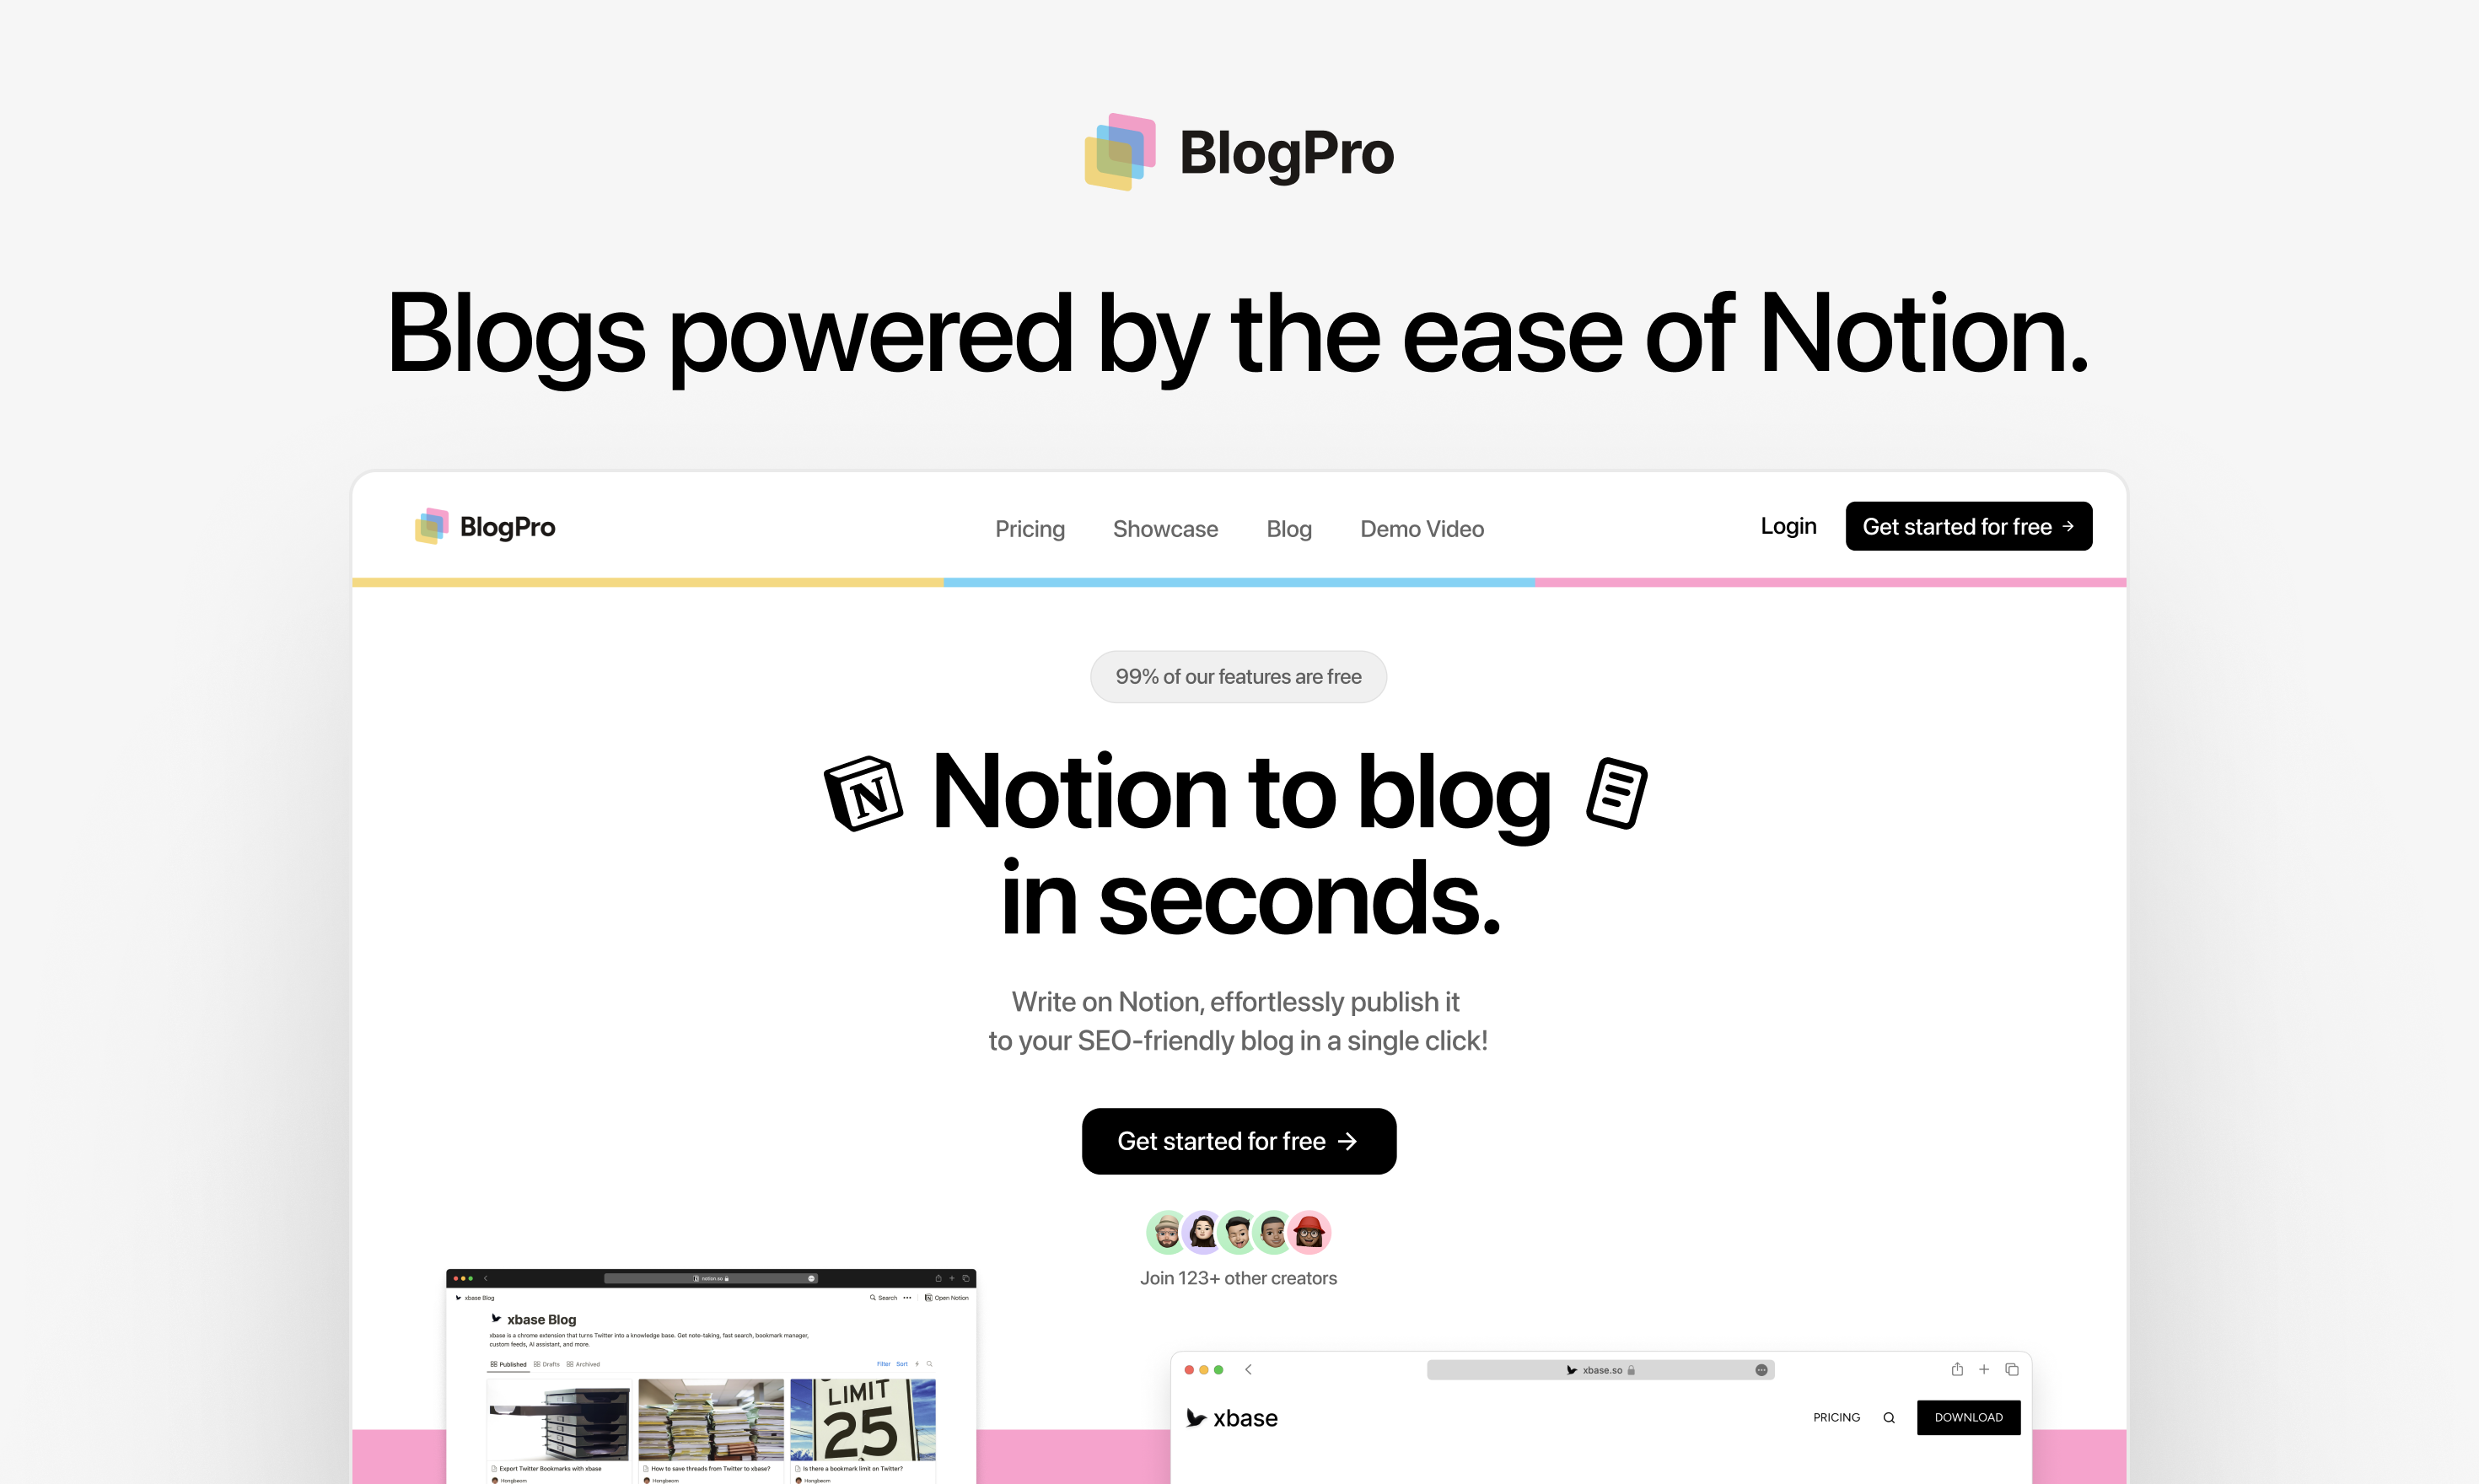 BlogPro Blogs powered by the ease of Notion.